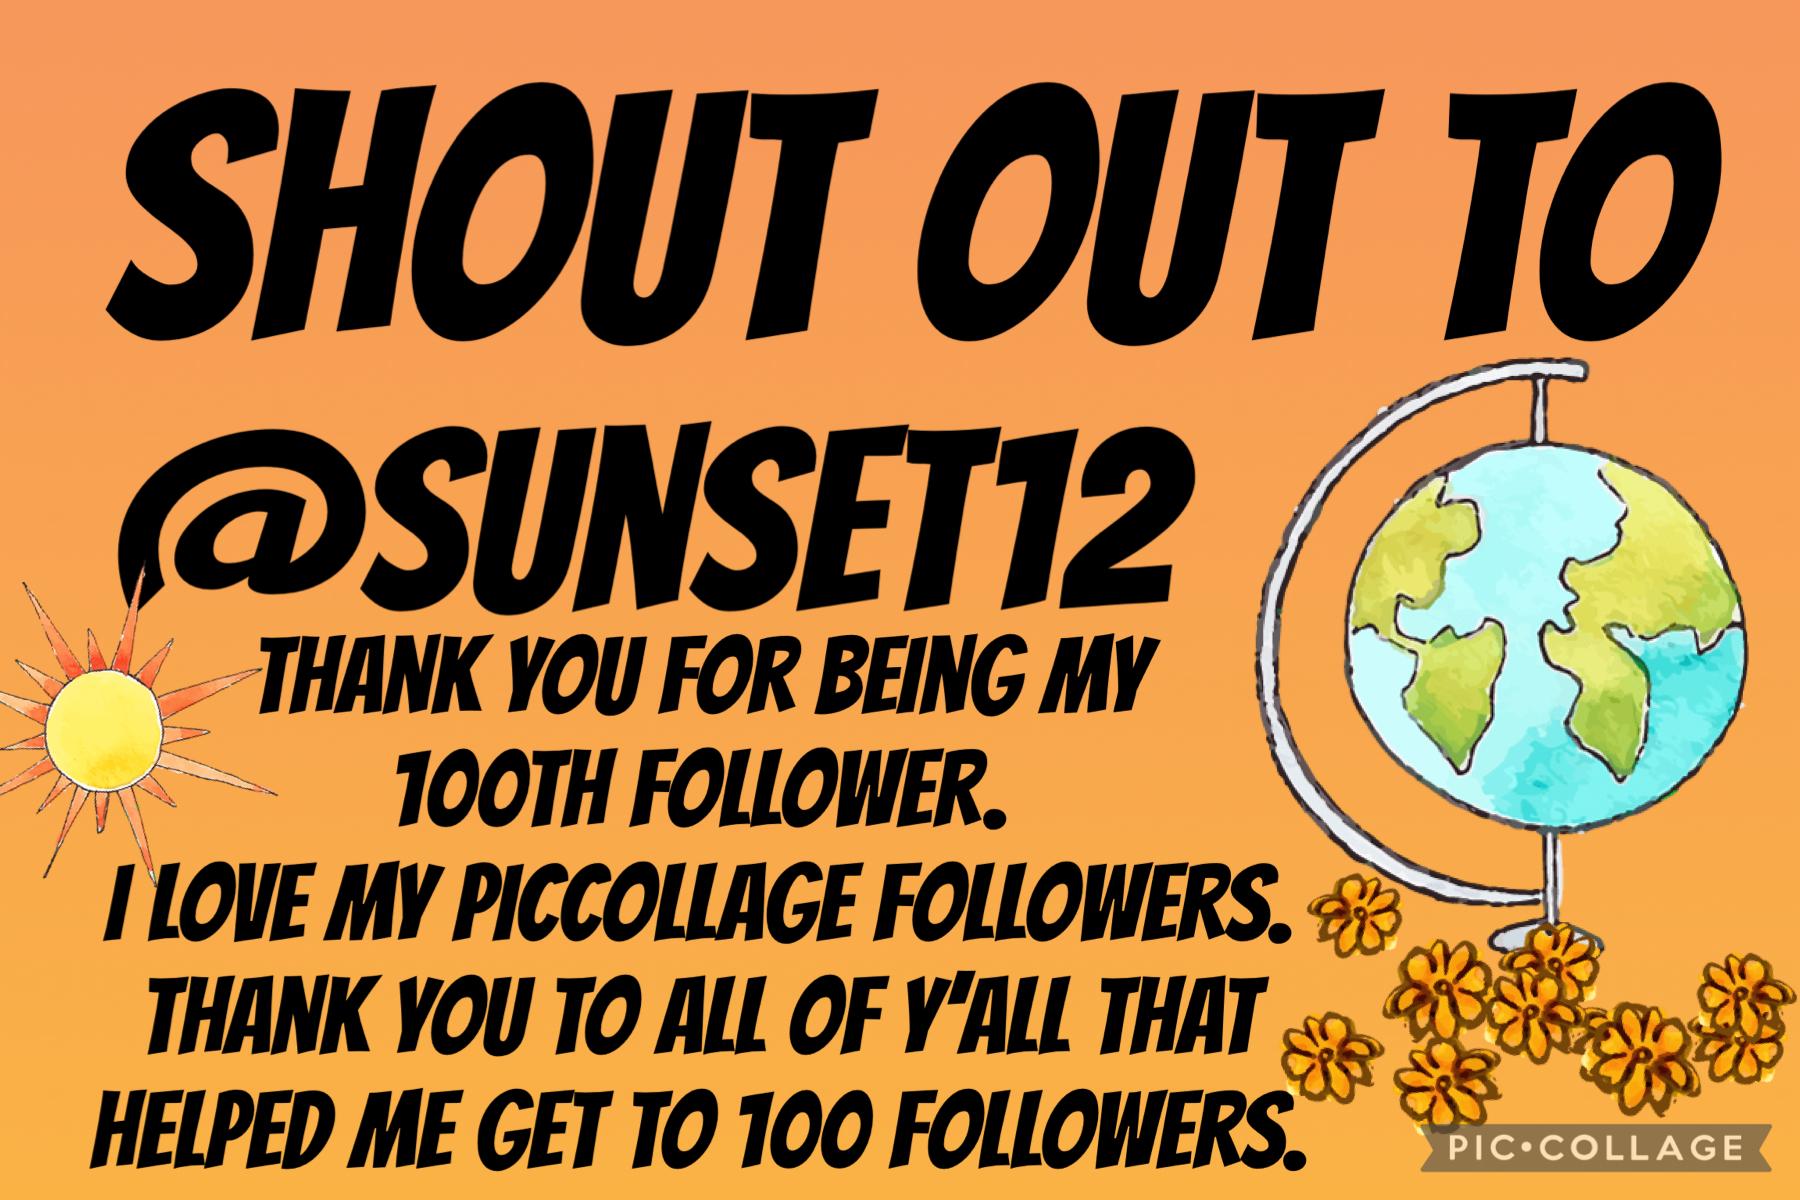 A BIG SHOUT OUT TO 
@sunset12 THANK YOU FOR BEING MY 100th FOLLOWER.
THANK YOU ALL FOR HELPING ME GET 100 FOLLOWERS ON PICCOLLAGE. 